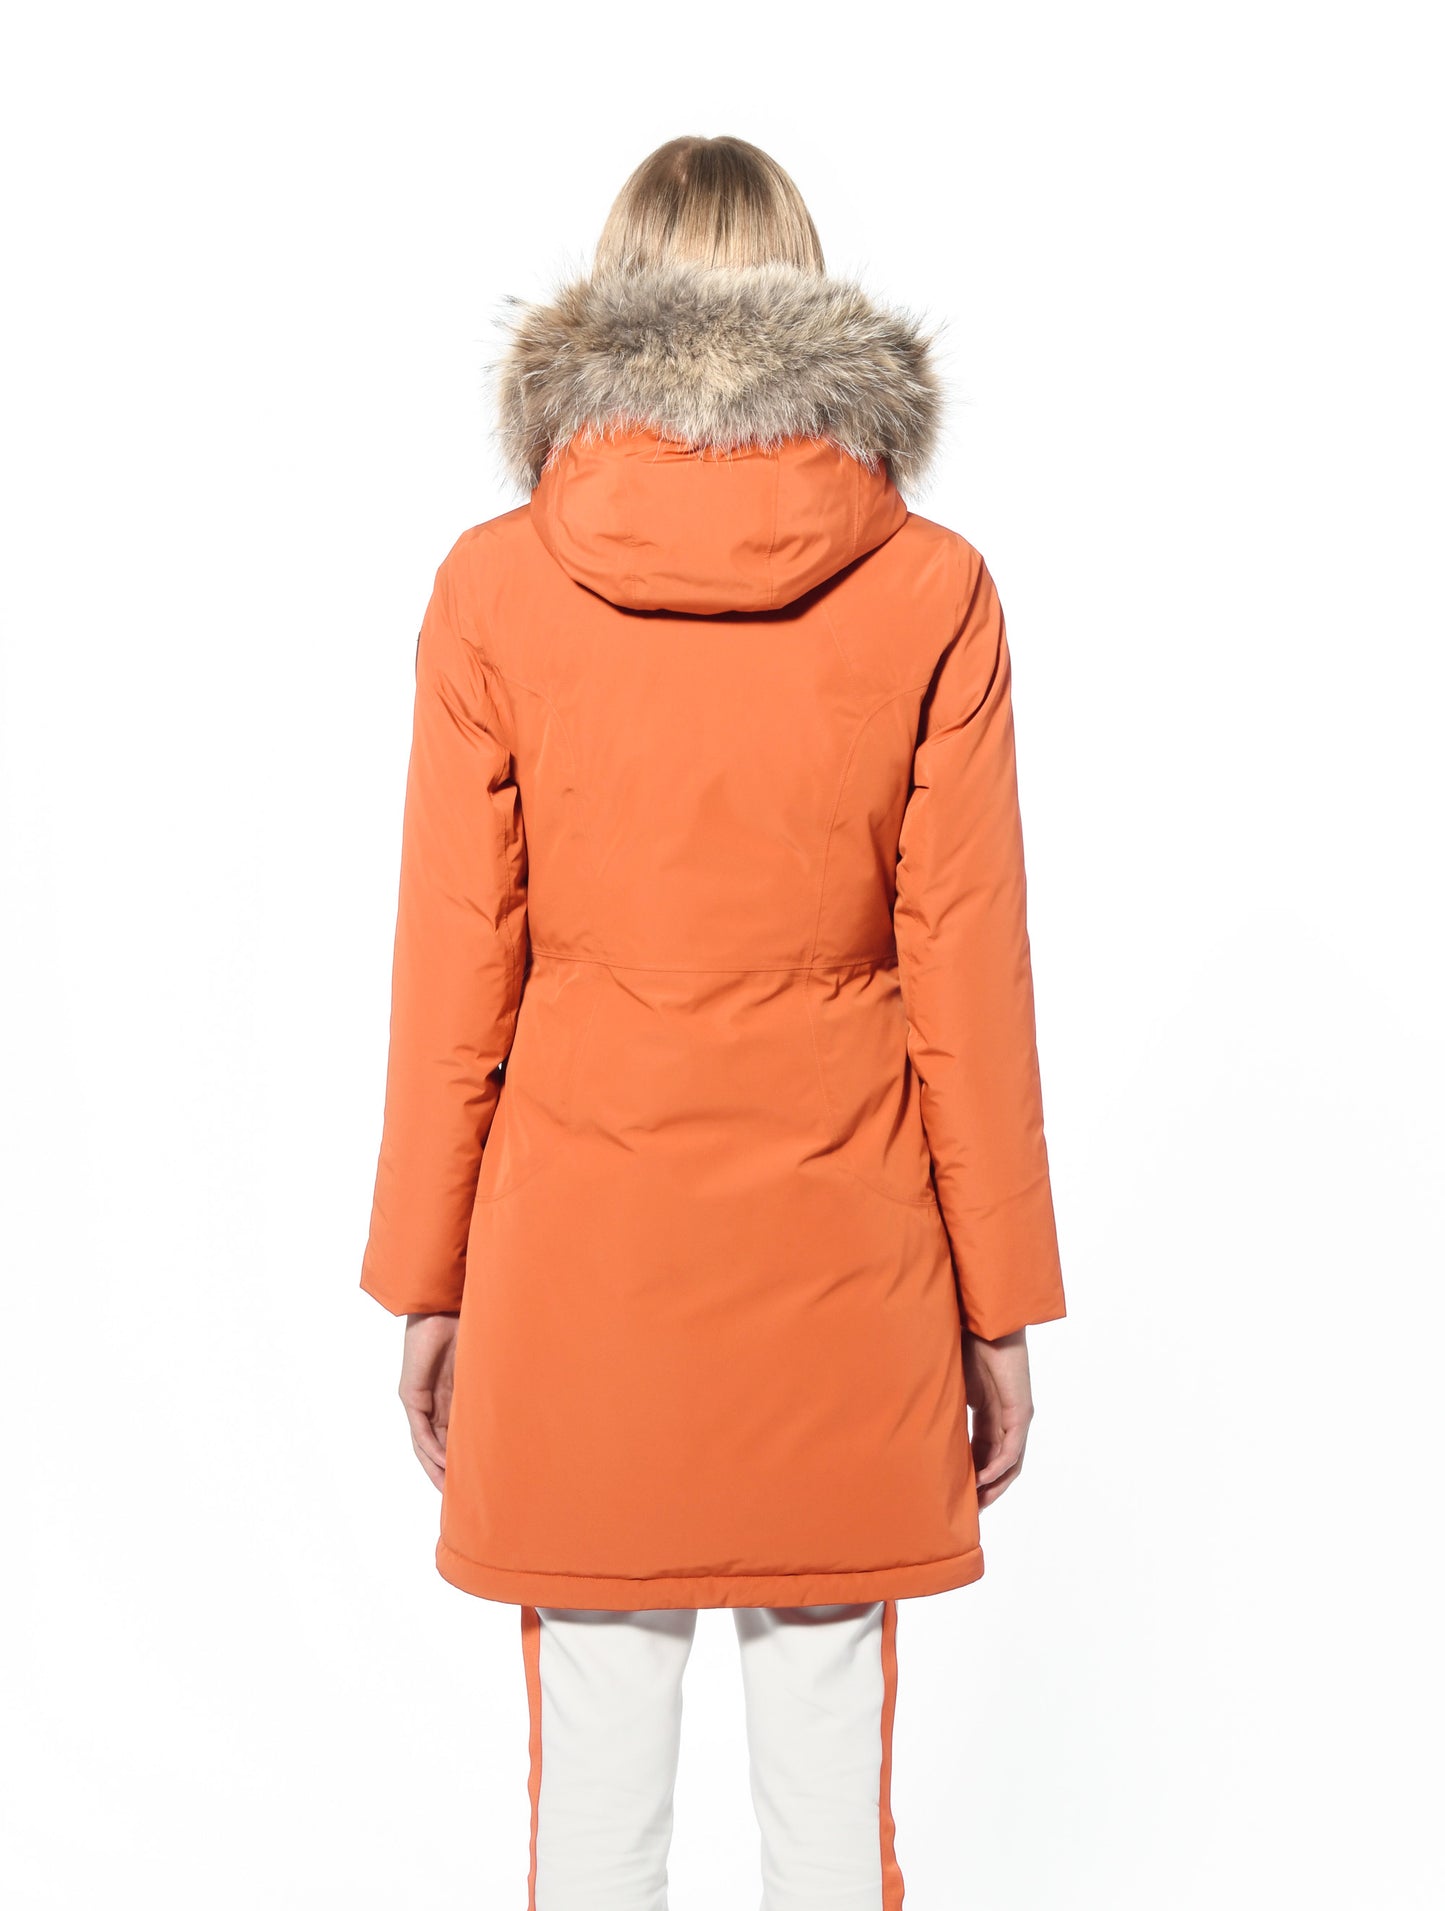 Ladies thigh length down-filled parka with non-removable hood and removable coyote fur trim in Atomic